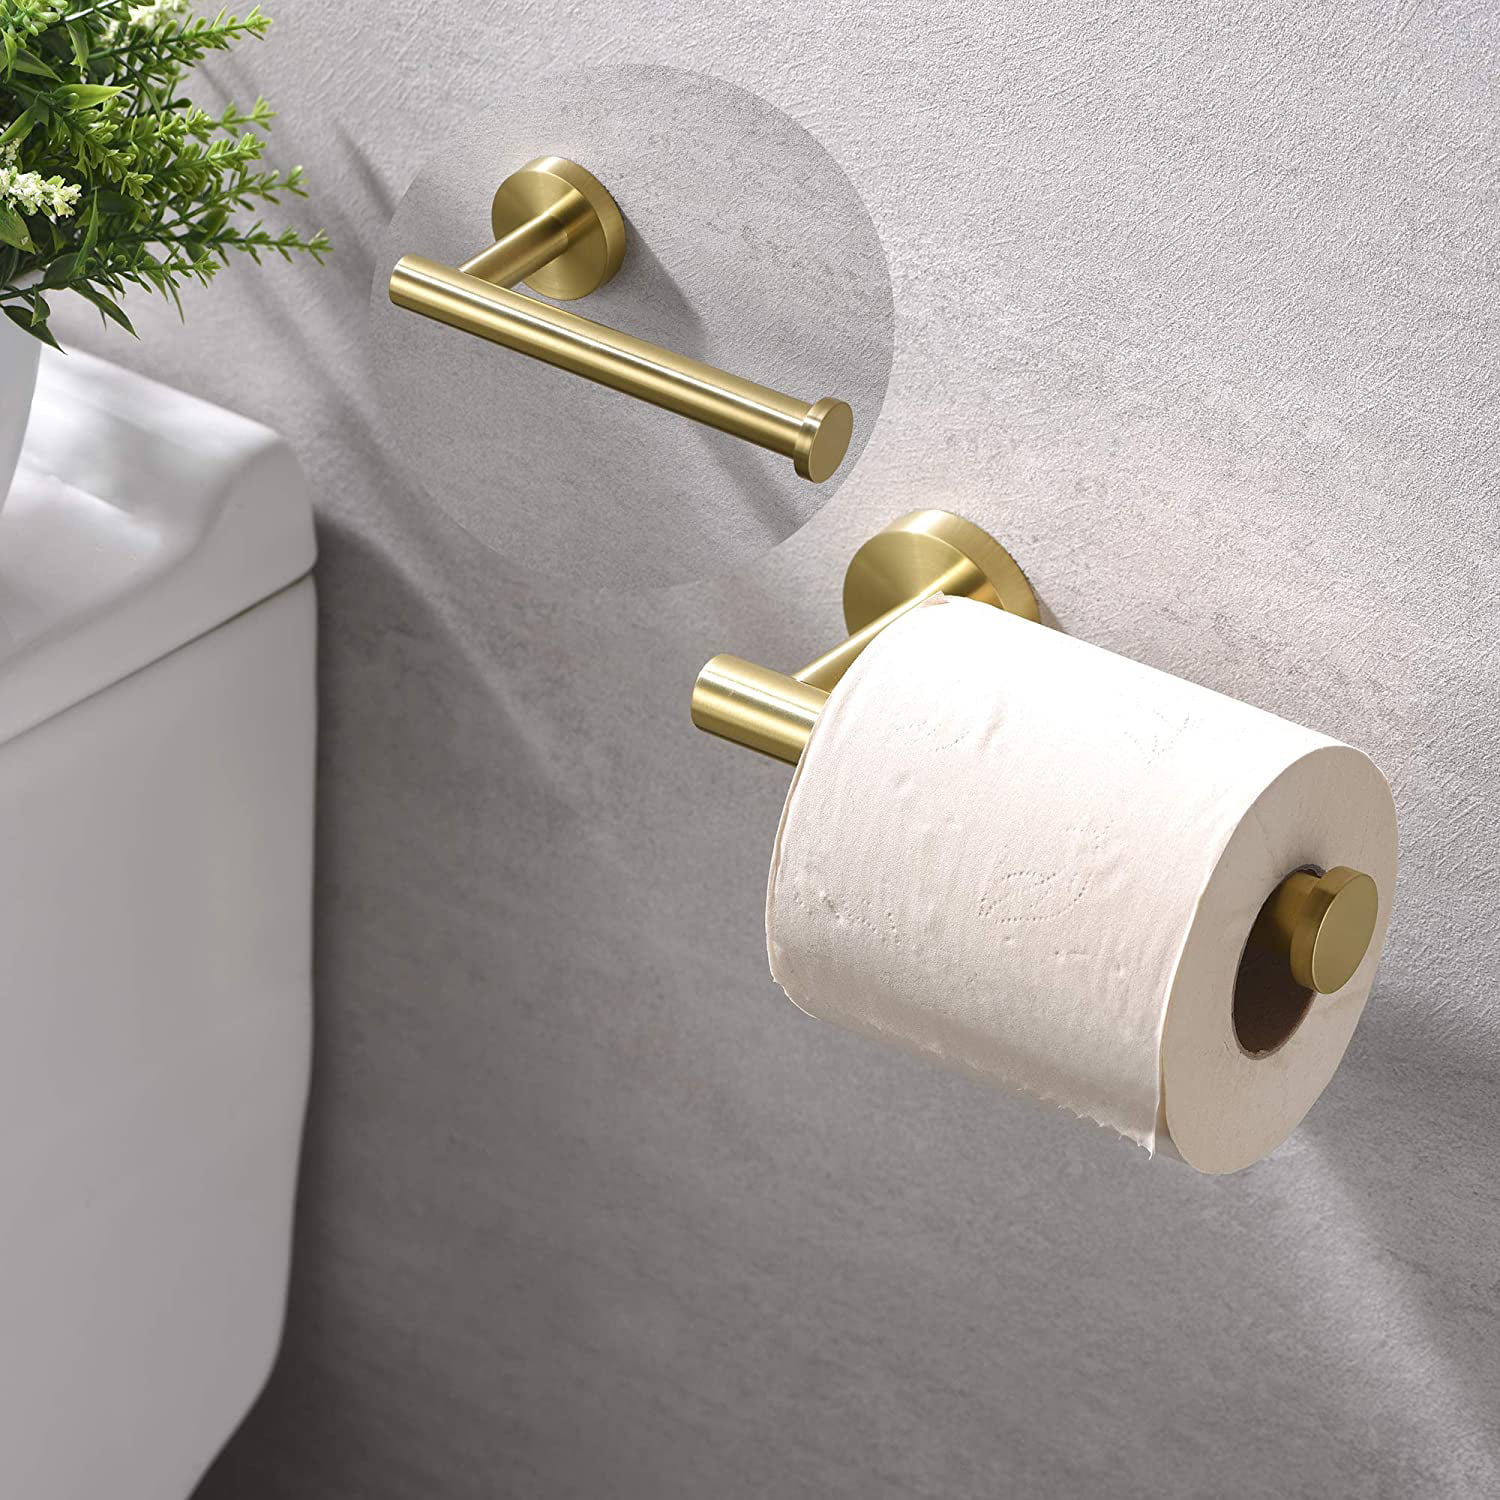 Toilet Paper Holder Rack Stainless Steel Bathroom Accessories Rotate Proof Gold 